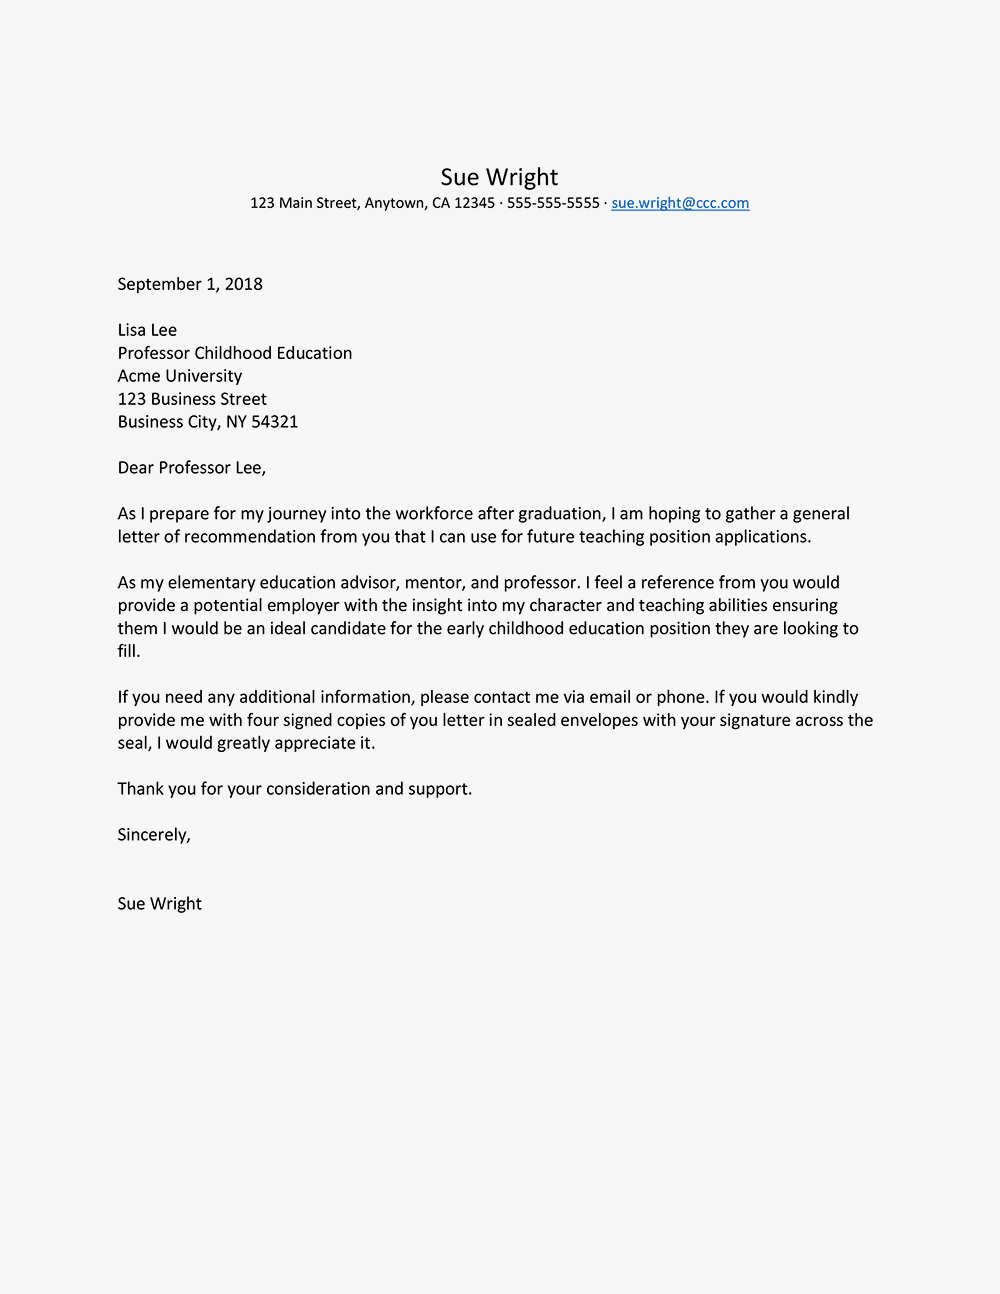 Fresh General Letter Of Recommendation Sample Download inside sizing 1000 X 1294